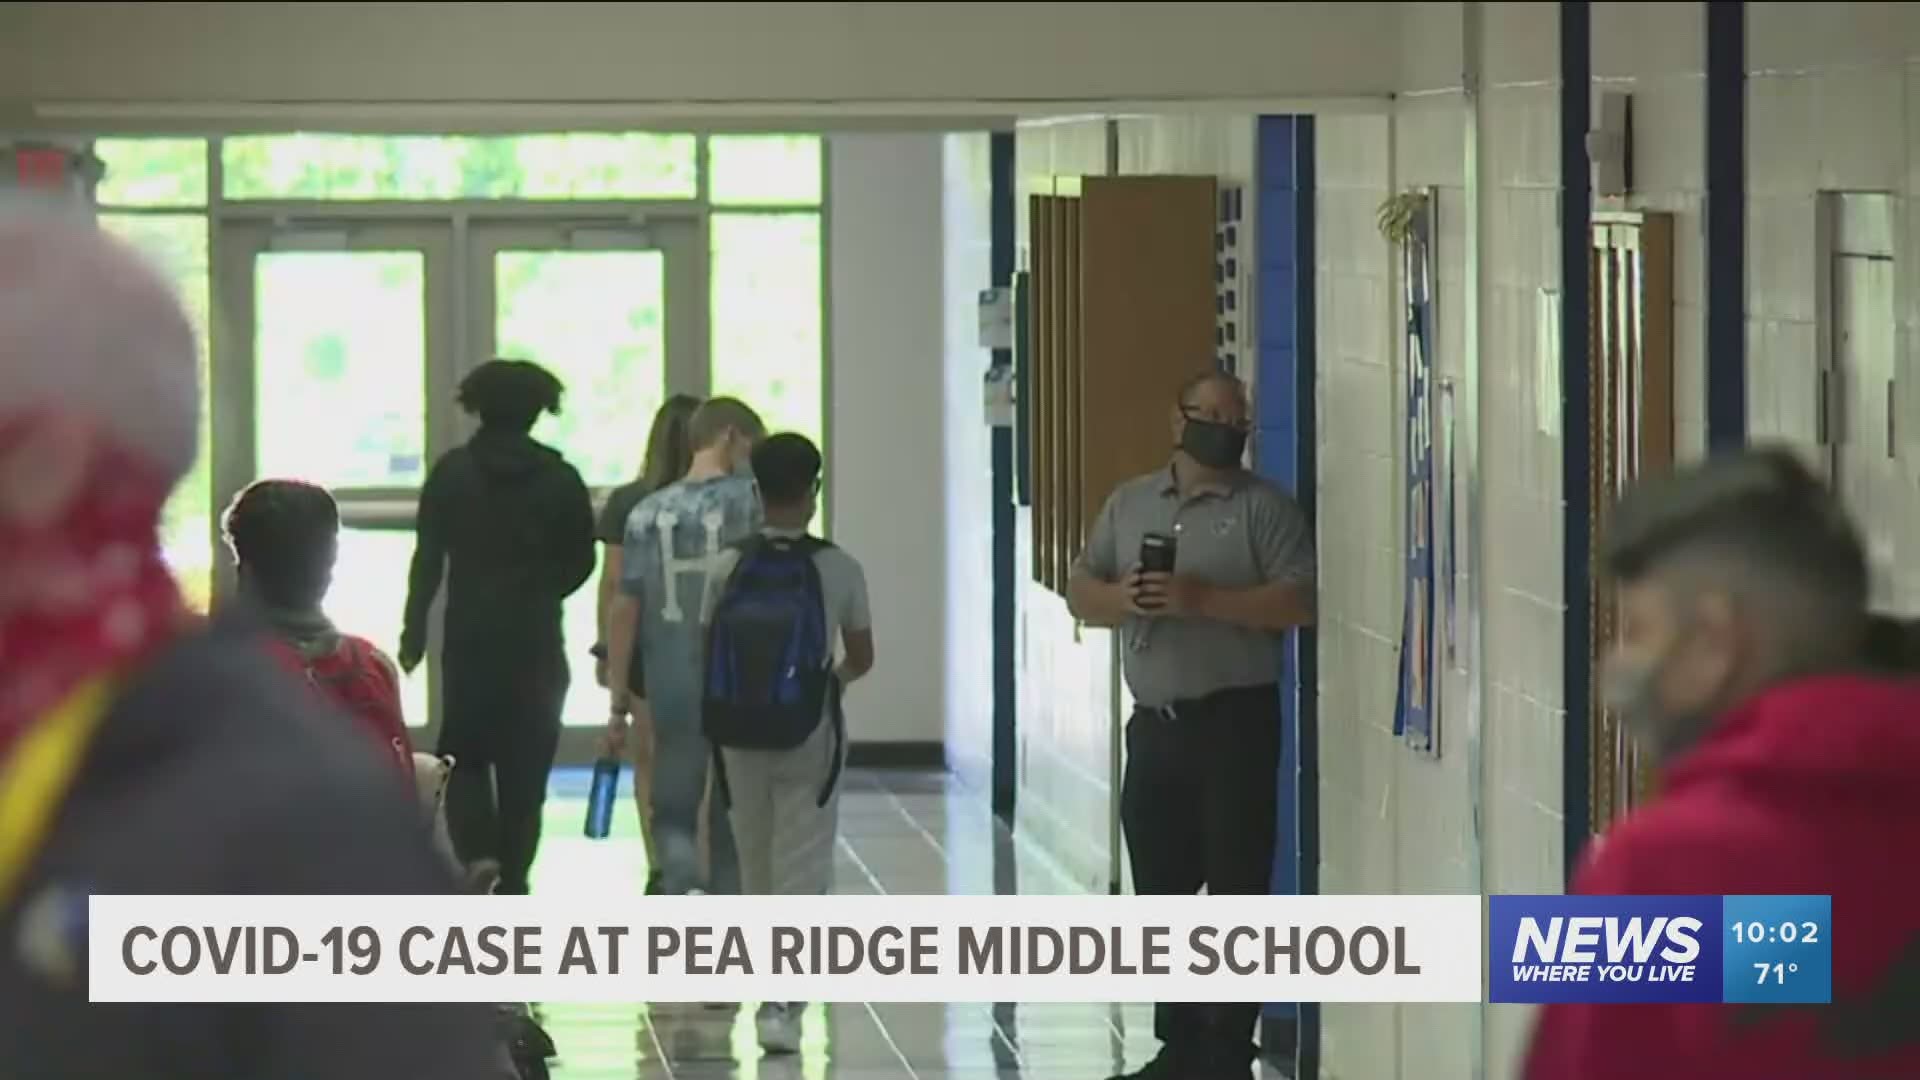 Pea Ridge Middle School is pivoting to remote learning for Sept. 9, following a positive COVID-19 case being reported in the building. https://bit.ly/32dzivk